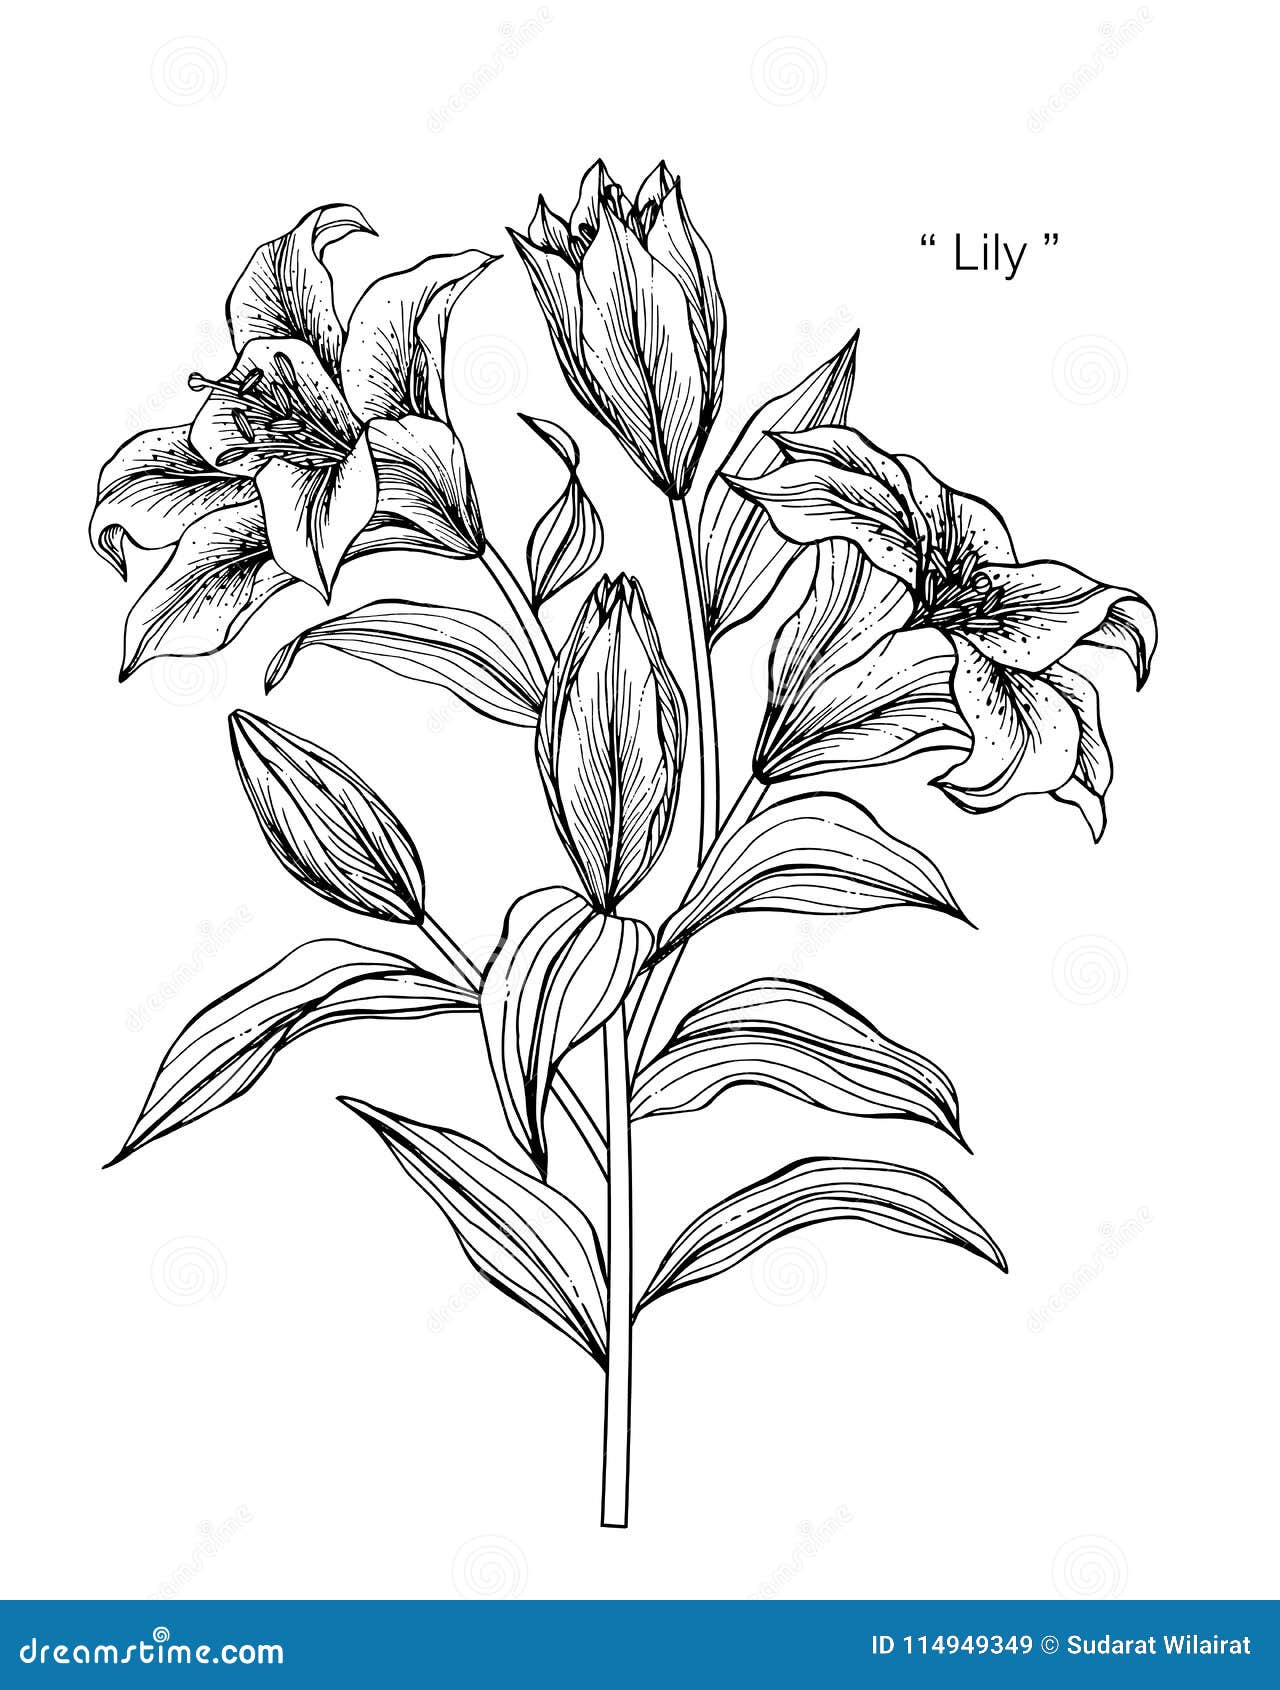 Lily flowers sketch hand drawn in doodle style Vector Image